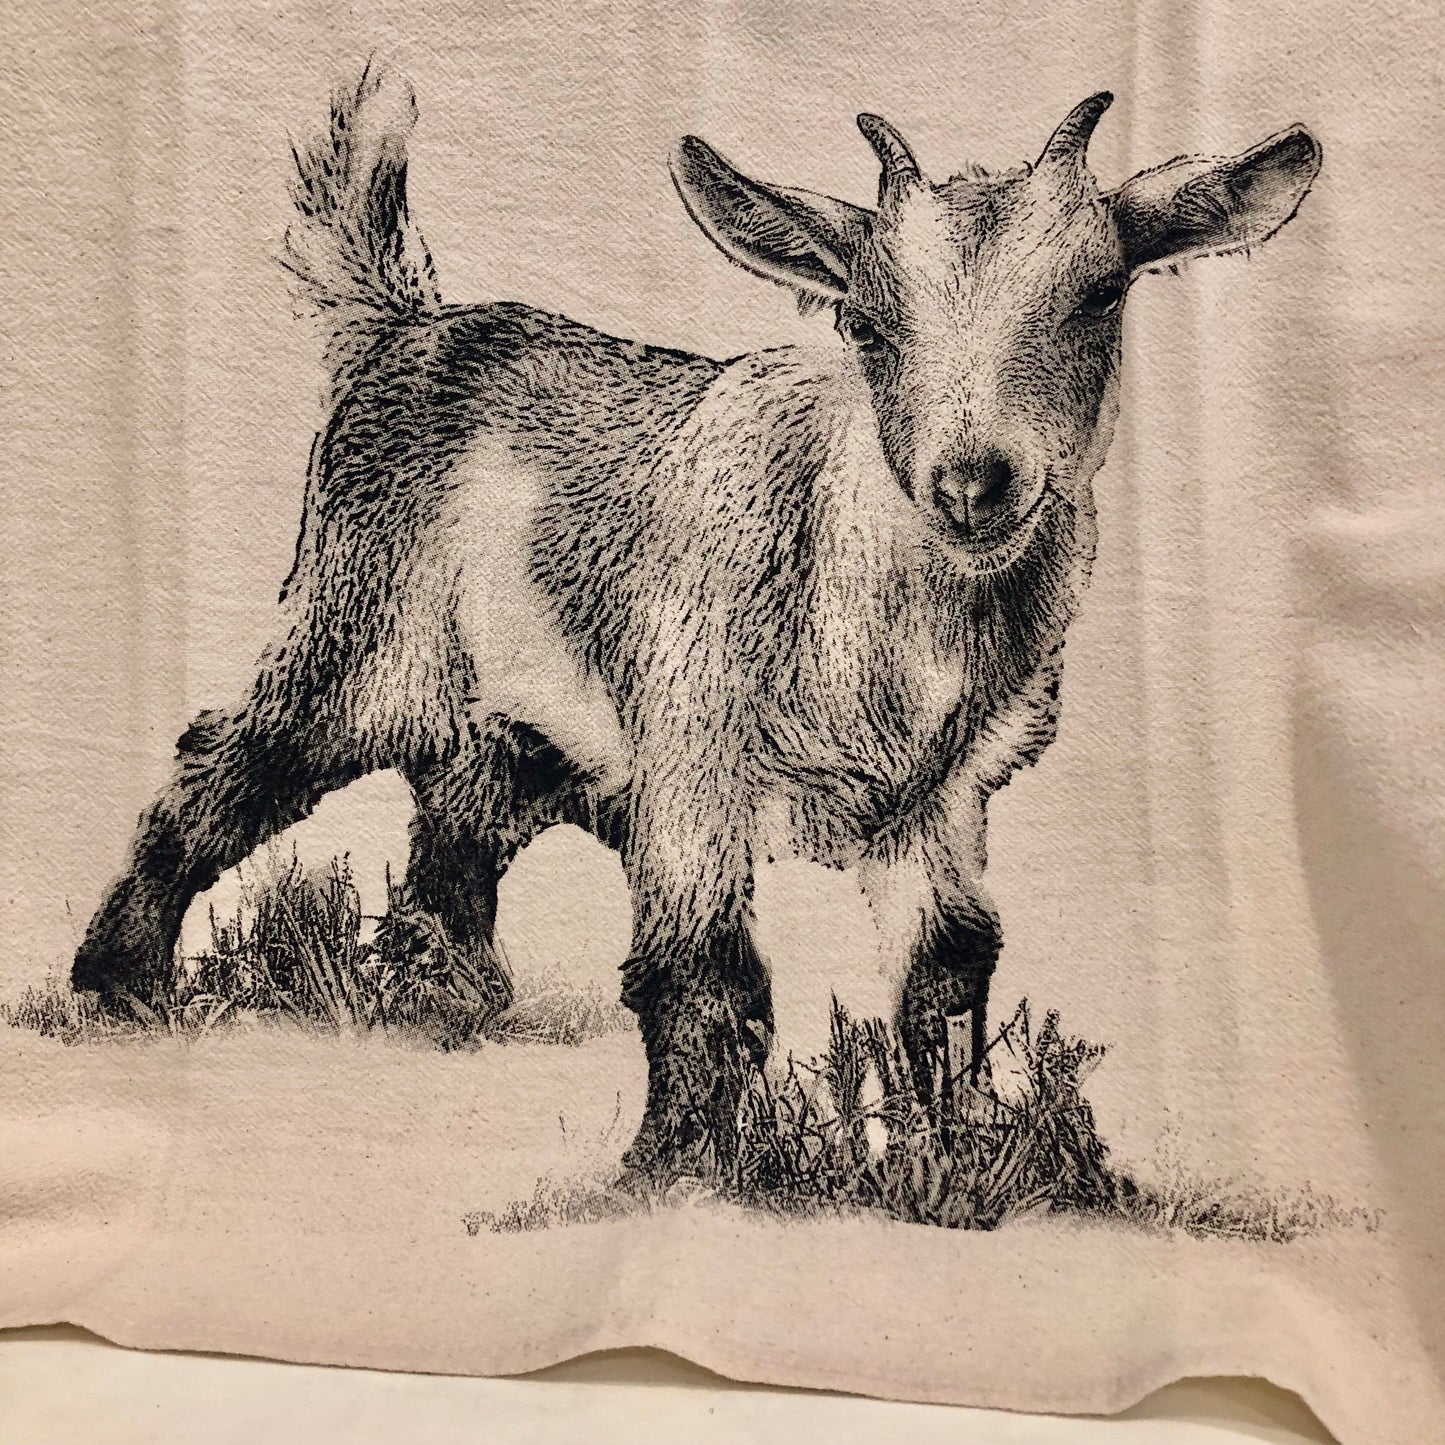 Towel, Flour Sack Kitchen Towel with Baby Goat